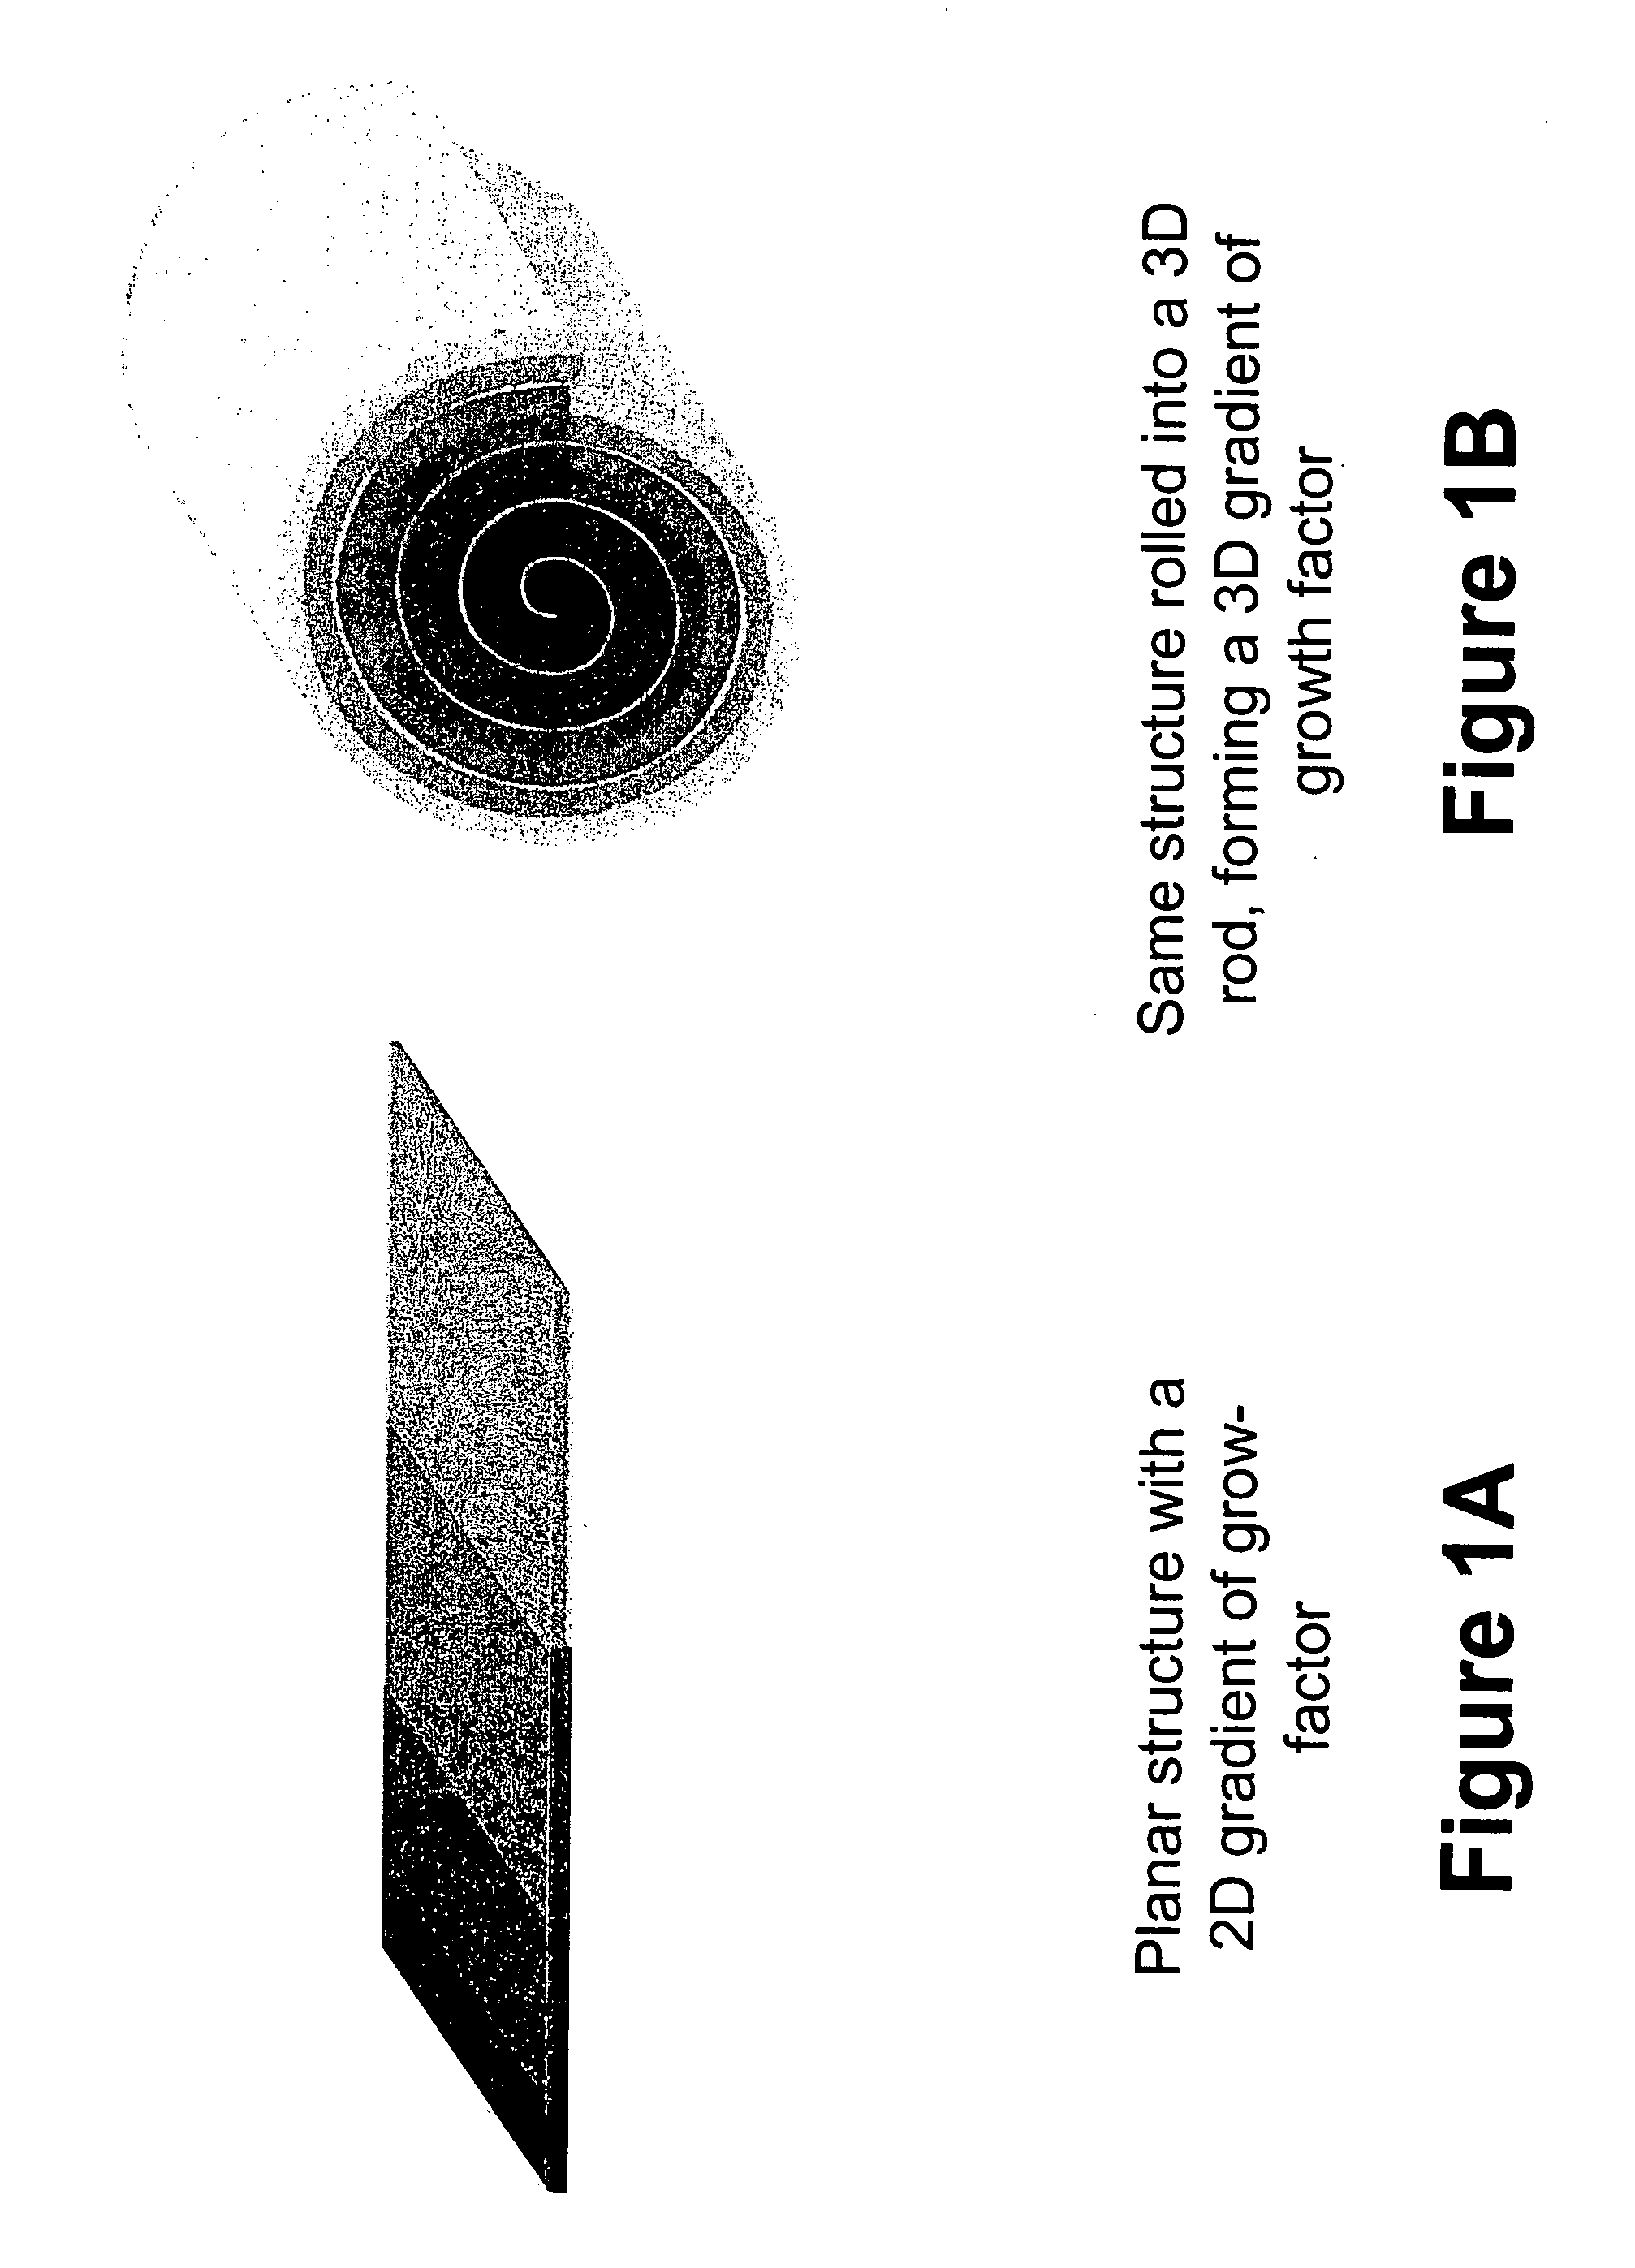 Biocompatible polymers and Methods of use